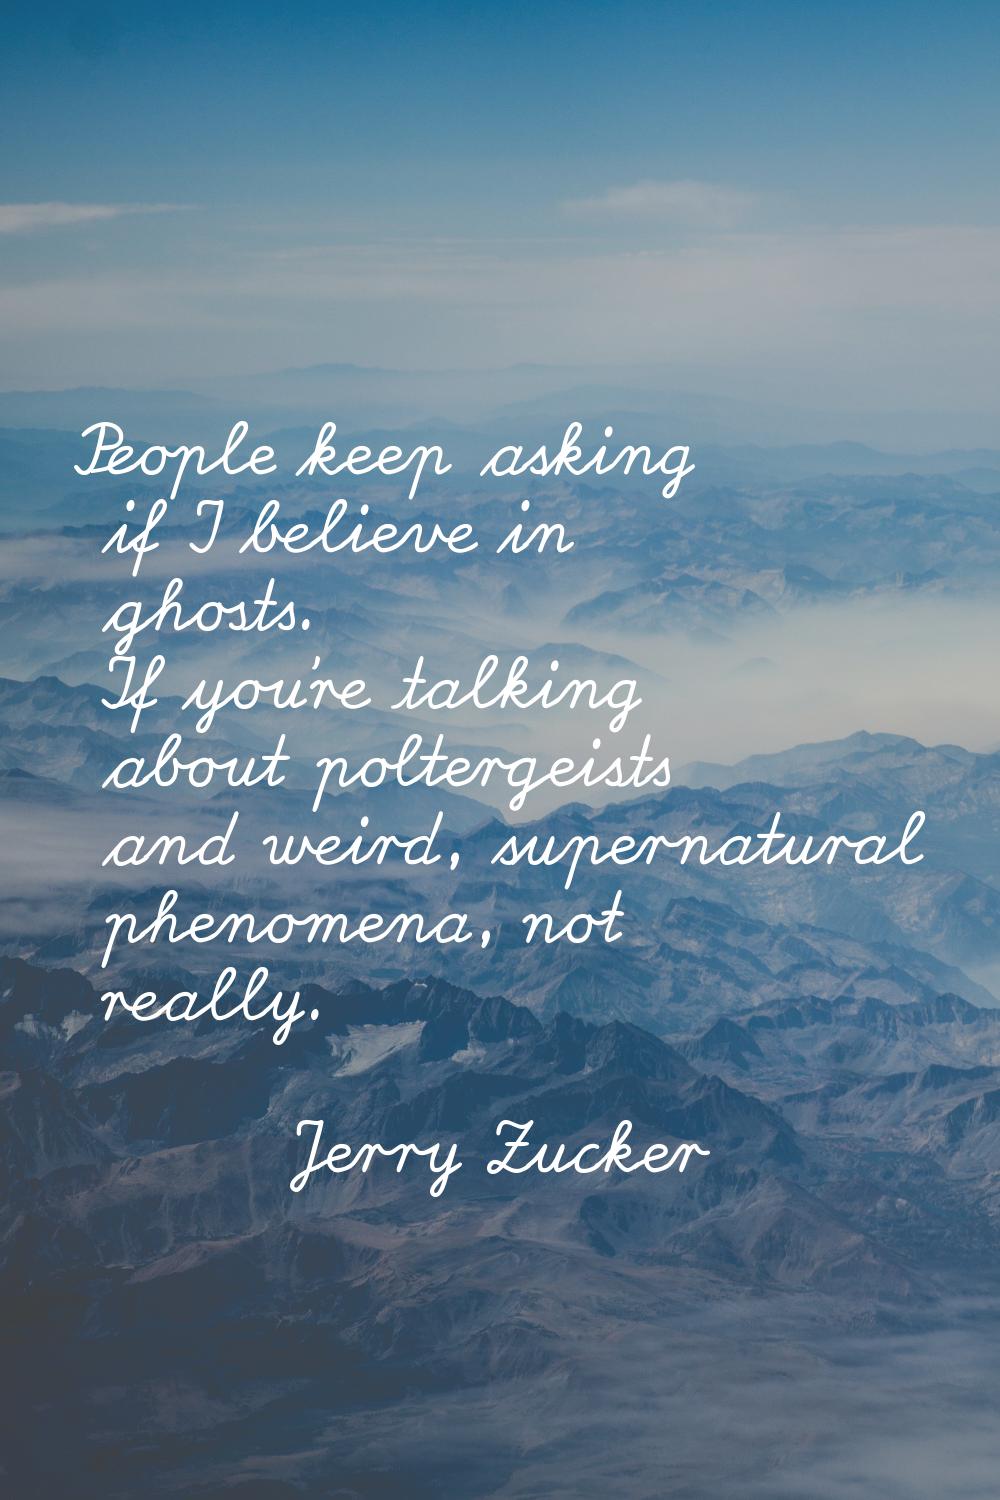 People keep asking if I believe in ghosts. If you're talking about poltergeists and weird, supernat